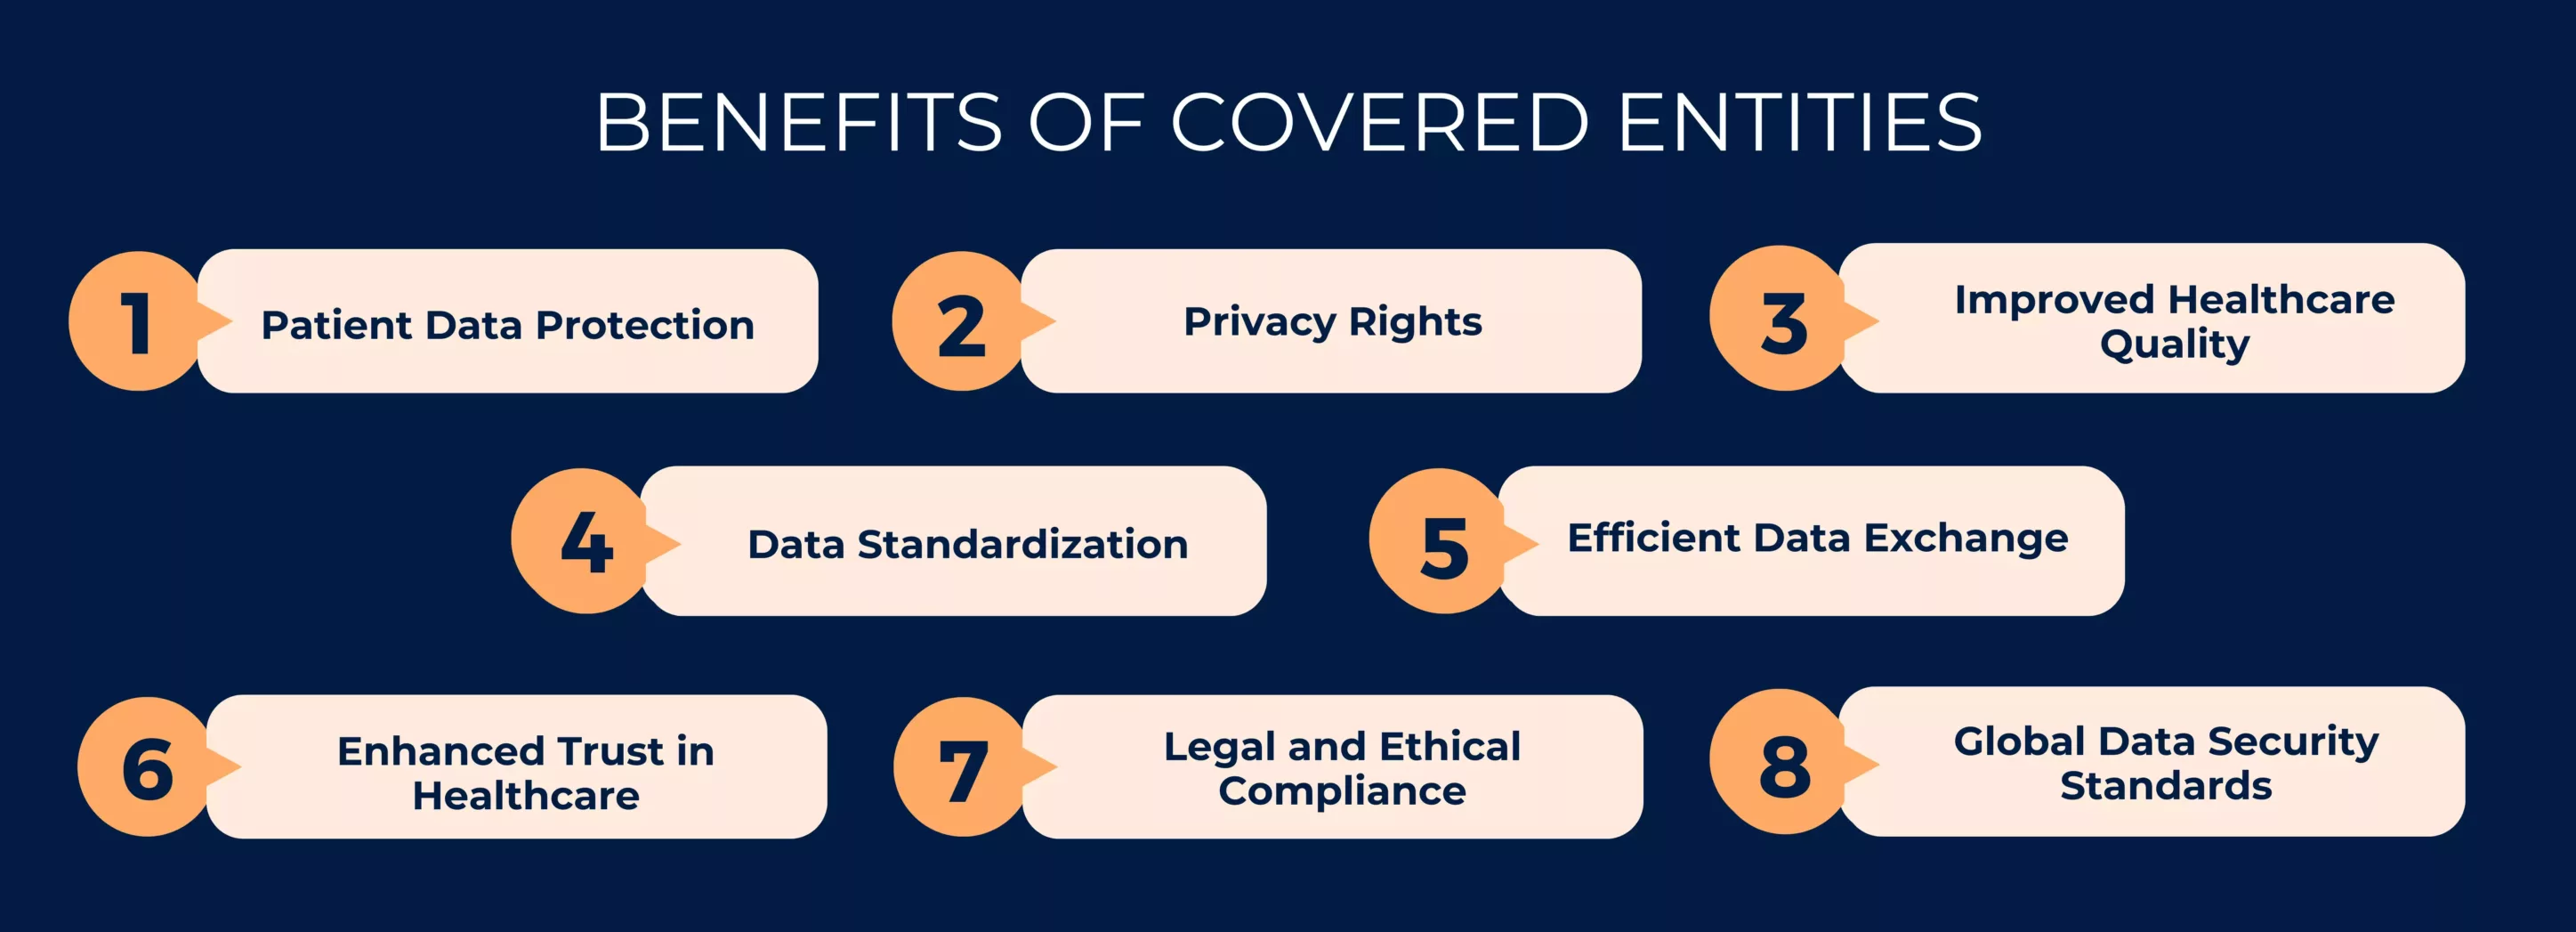 Benefits of Covered Entities